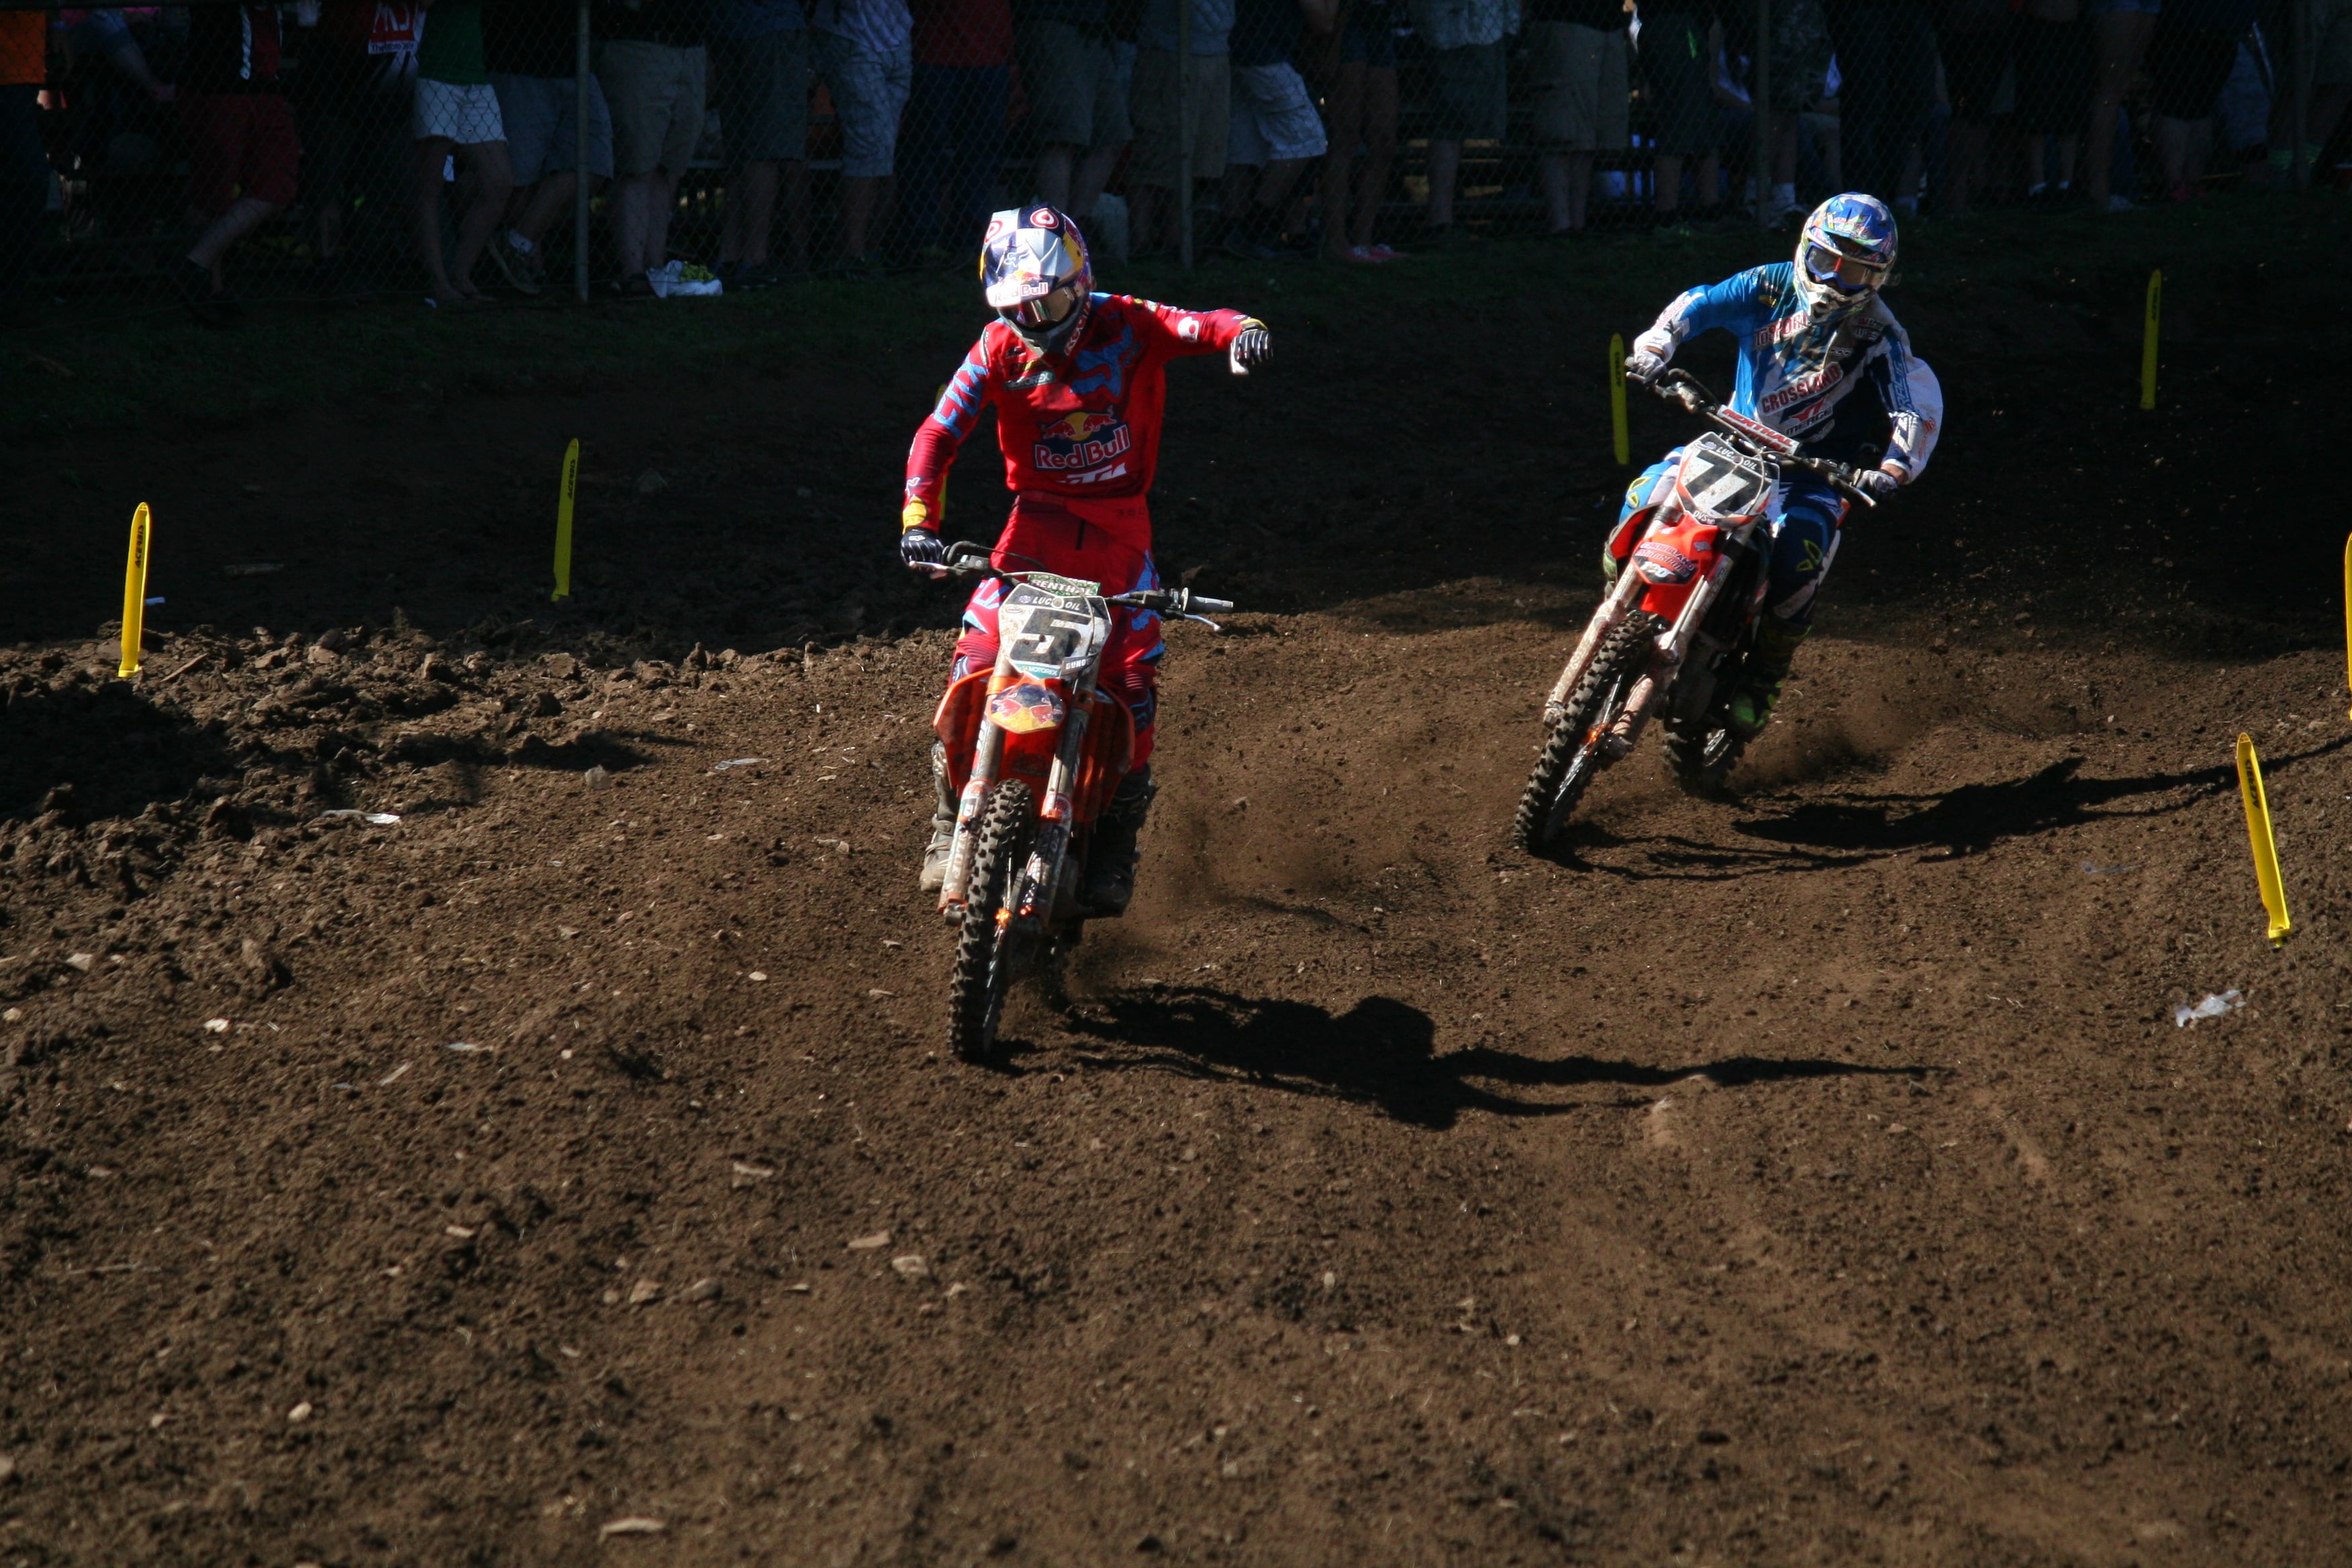 Ryan Dungey pumps his fist after winning the Washougal National.